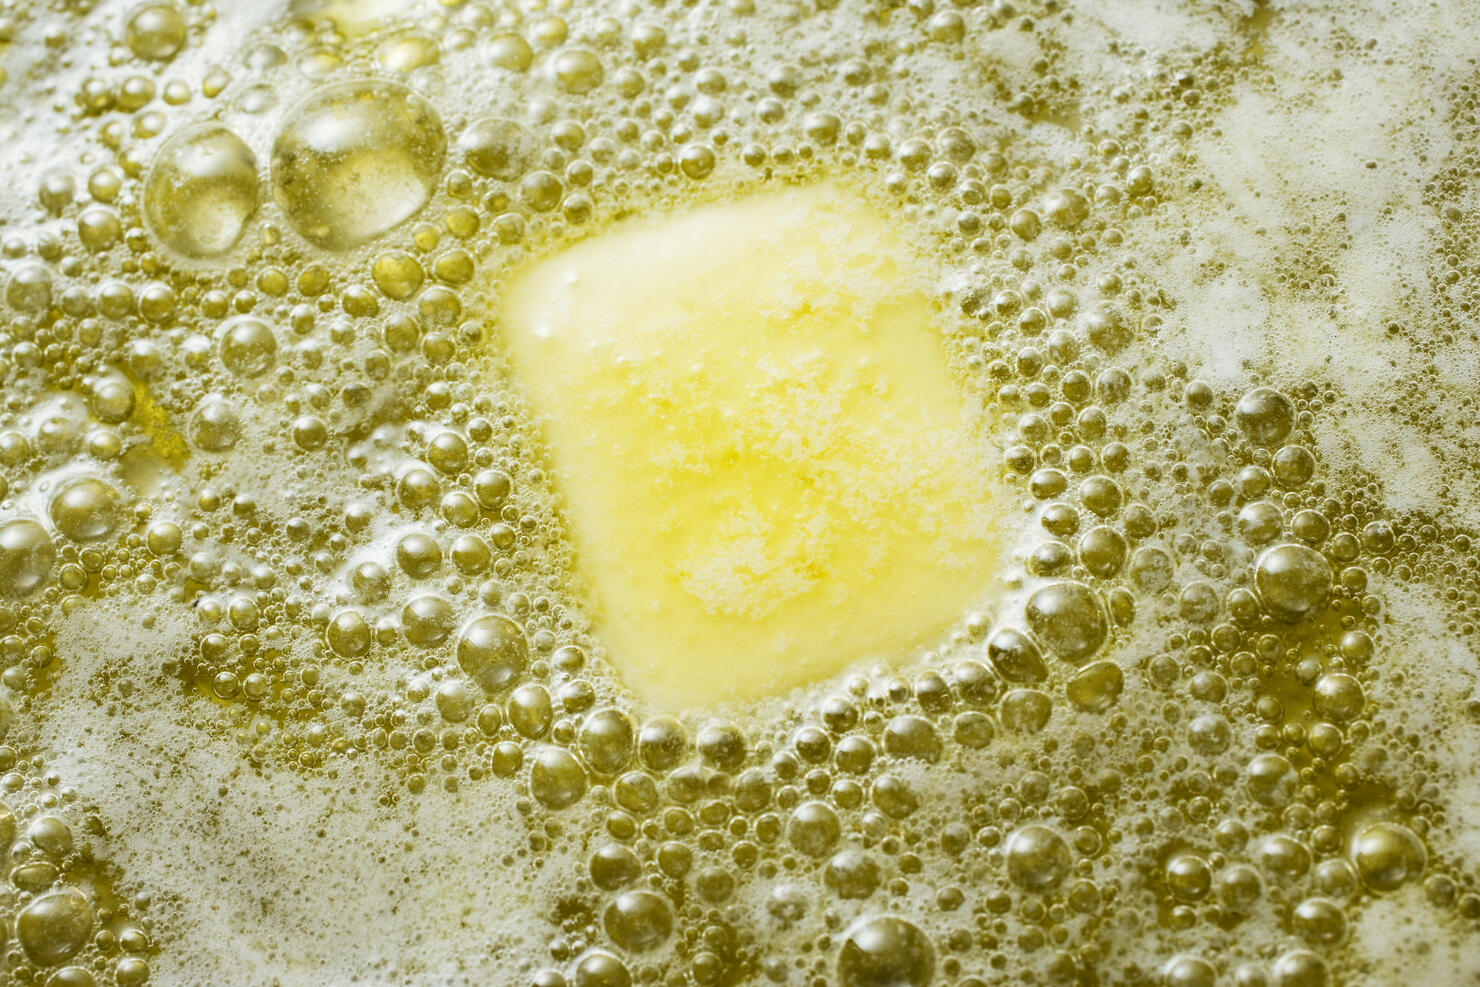 Heating butter and oil in frying pan